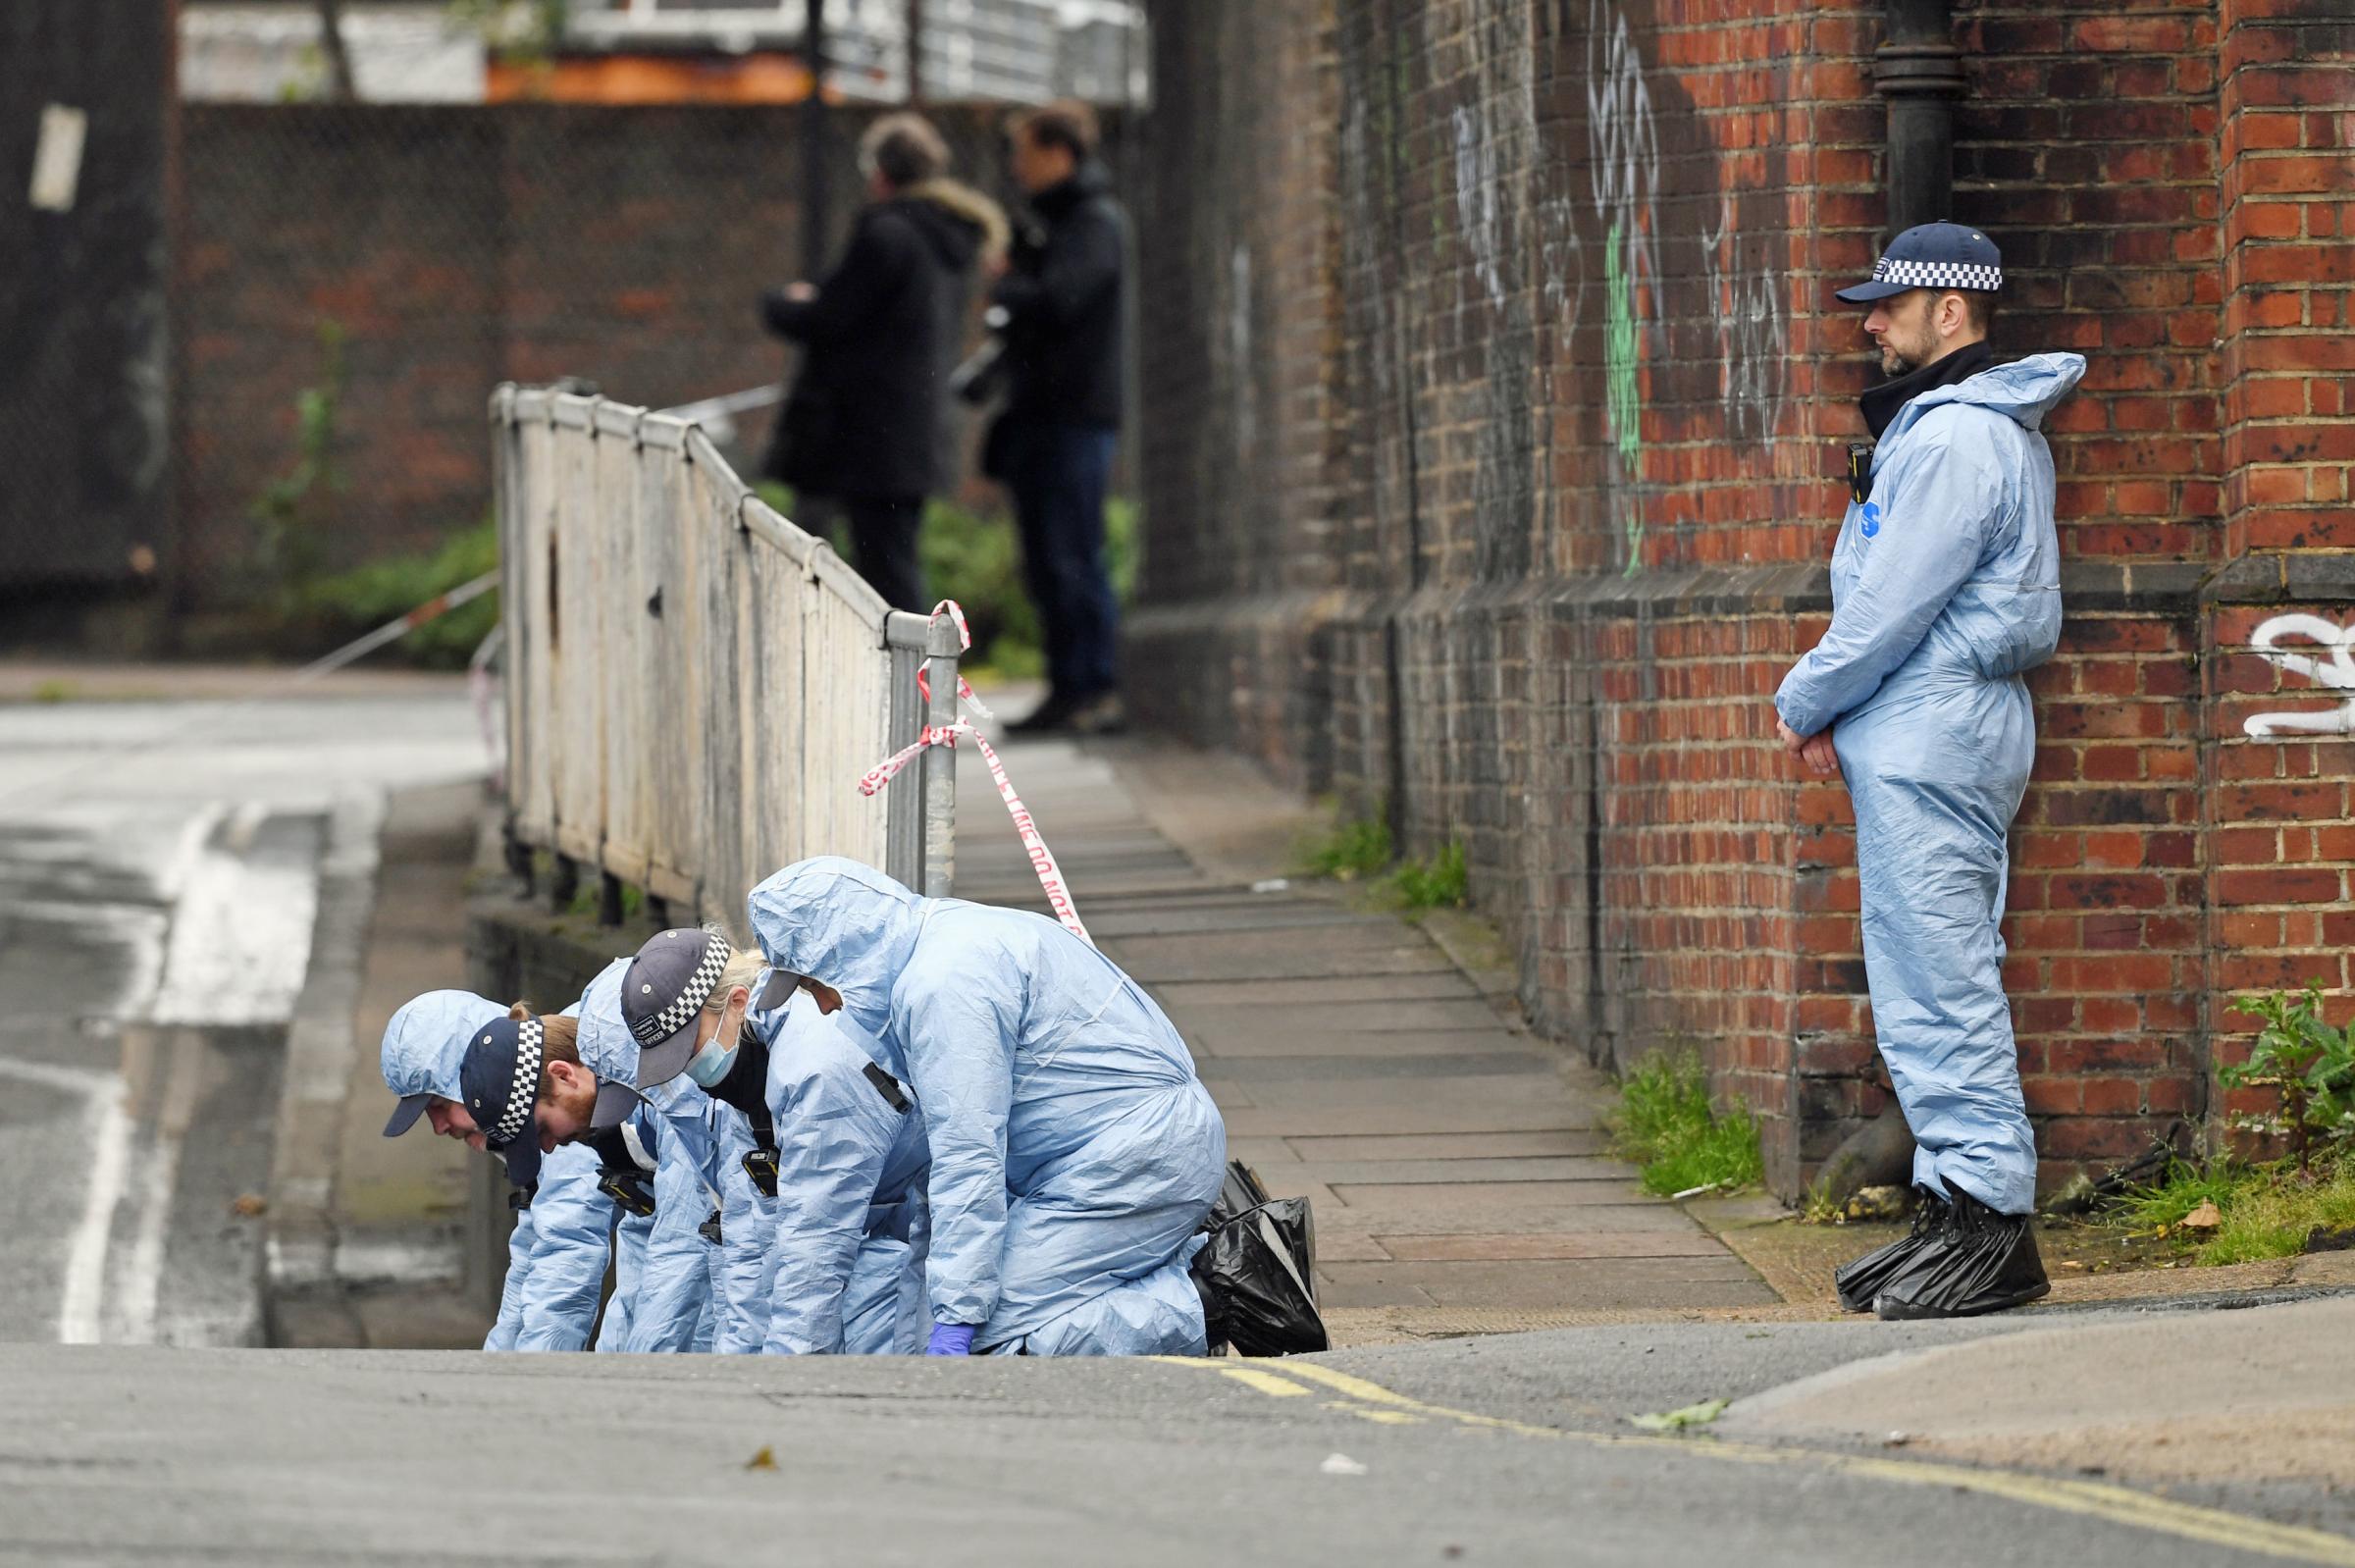 Police forensic officers search a street in Peckham, southeast London, close to where black equal rights activist Sasha Johnson was shot in the head during the early hours Picture: Kirsty OConnor/PA Wire